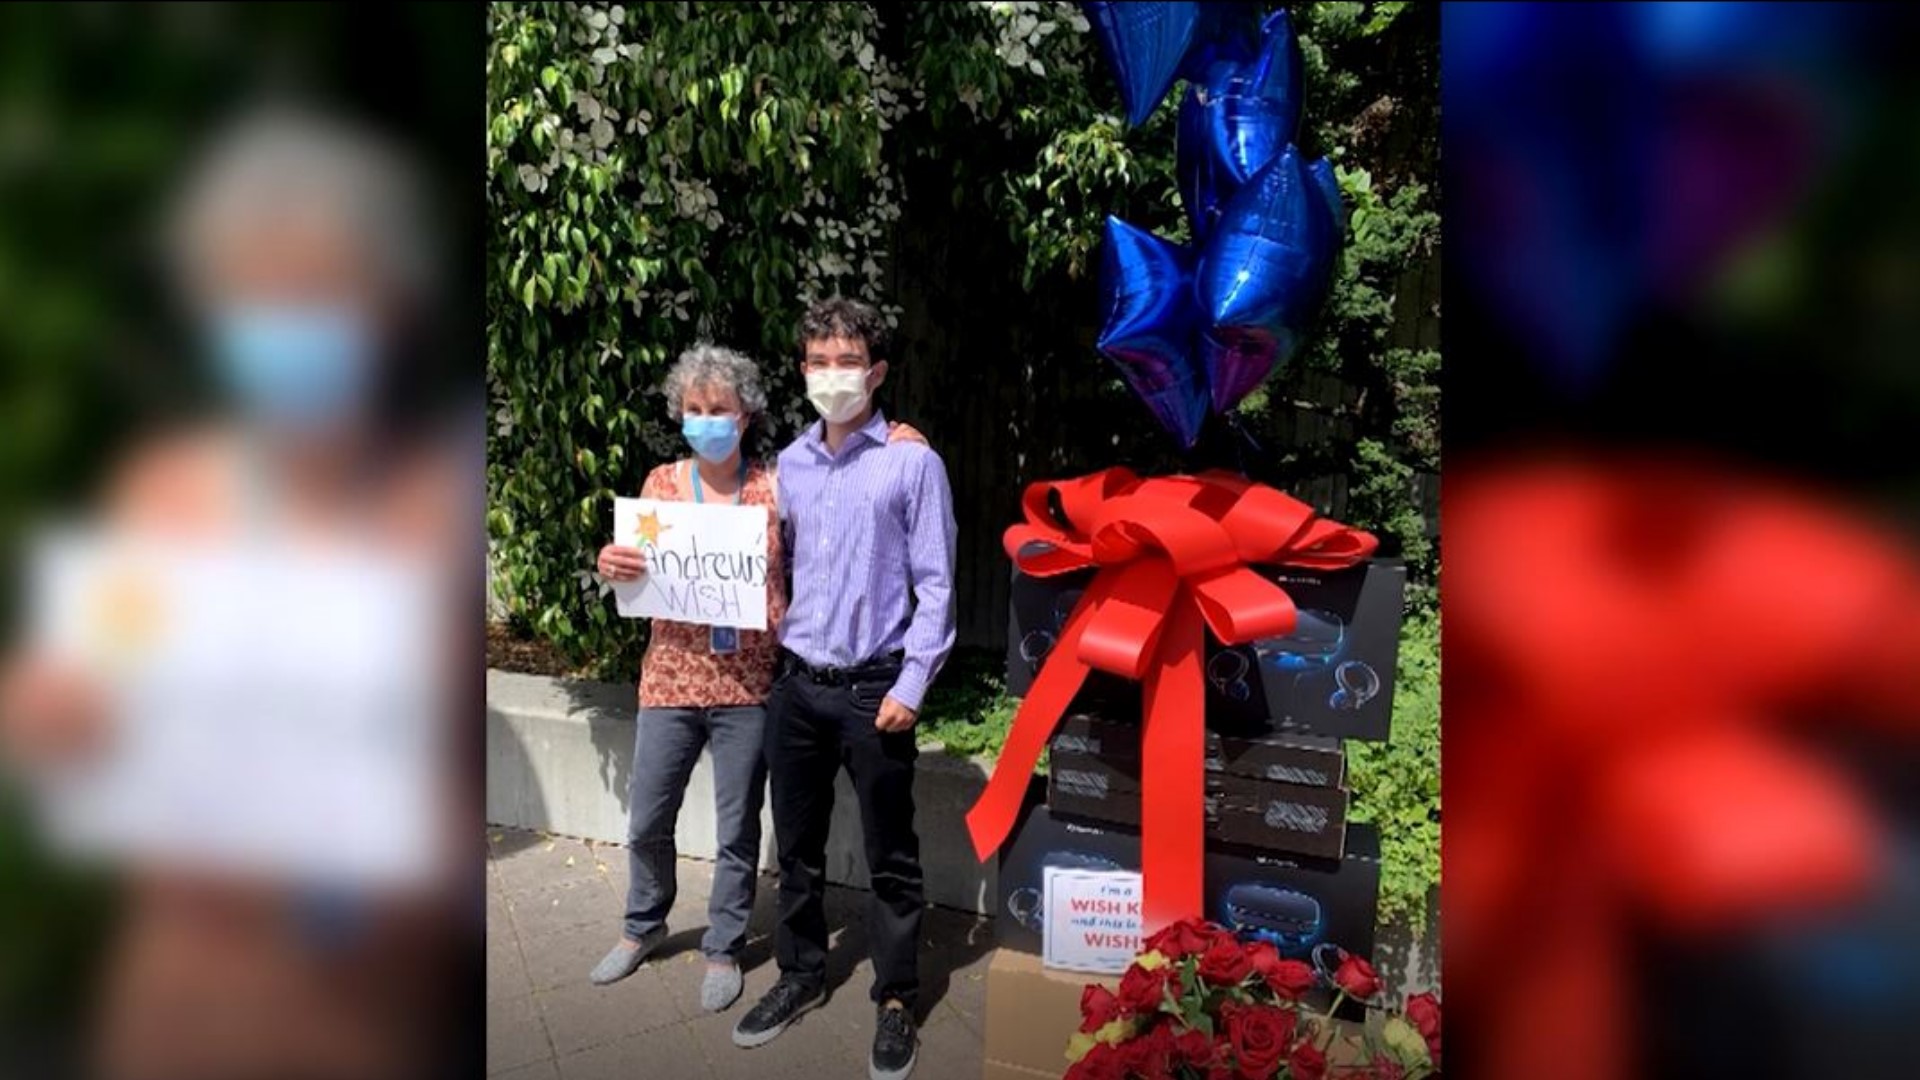 17 year old Andrew Darnell's wish means an escape for young cancer patients at Seattle Children's. #k5evening